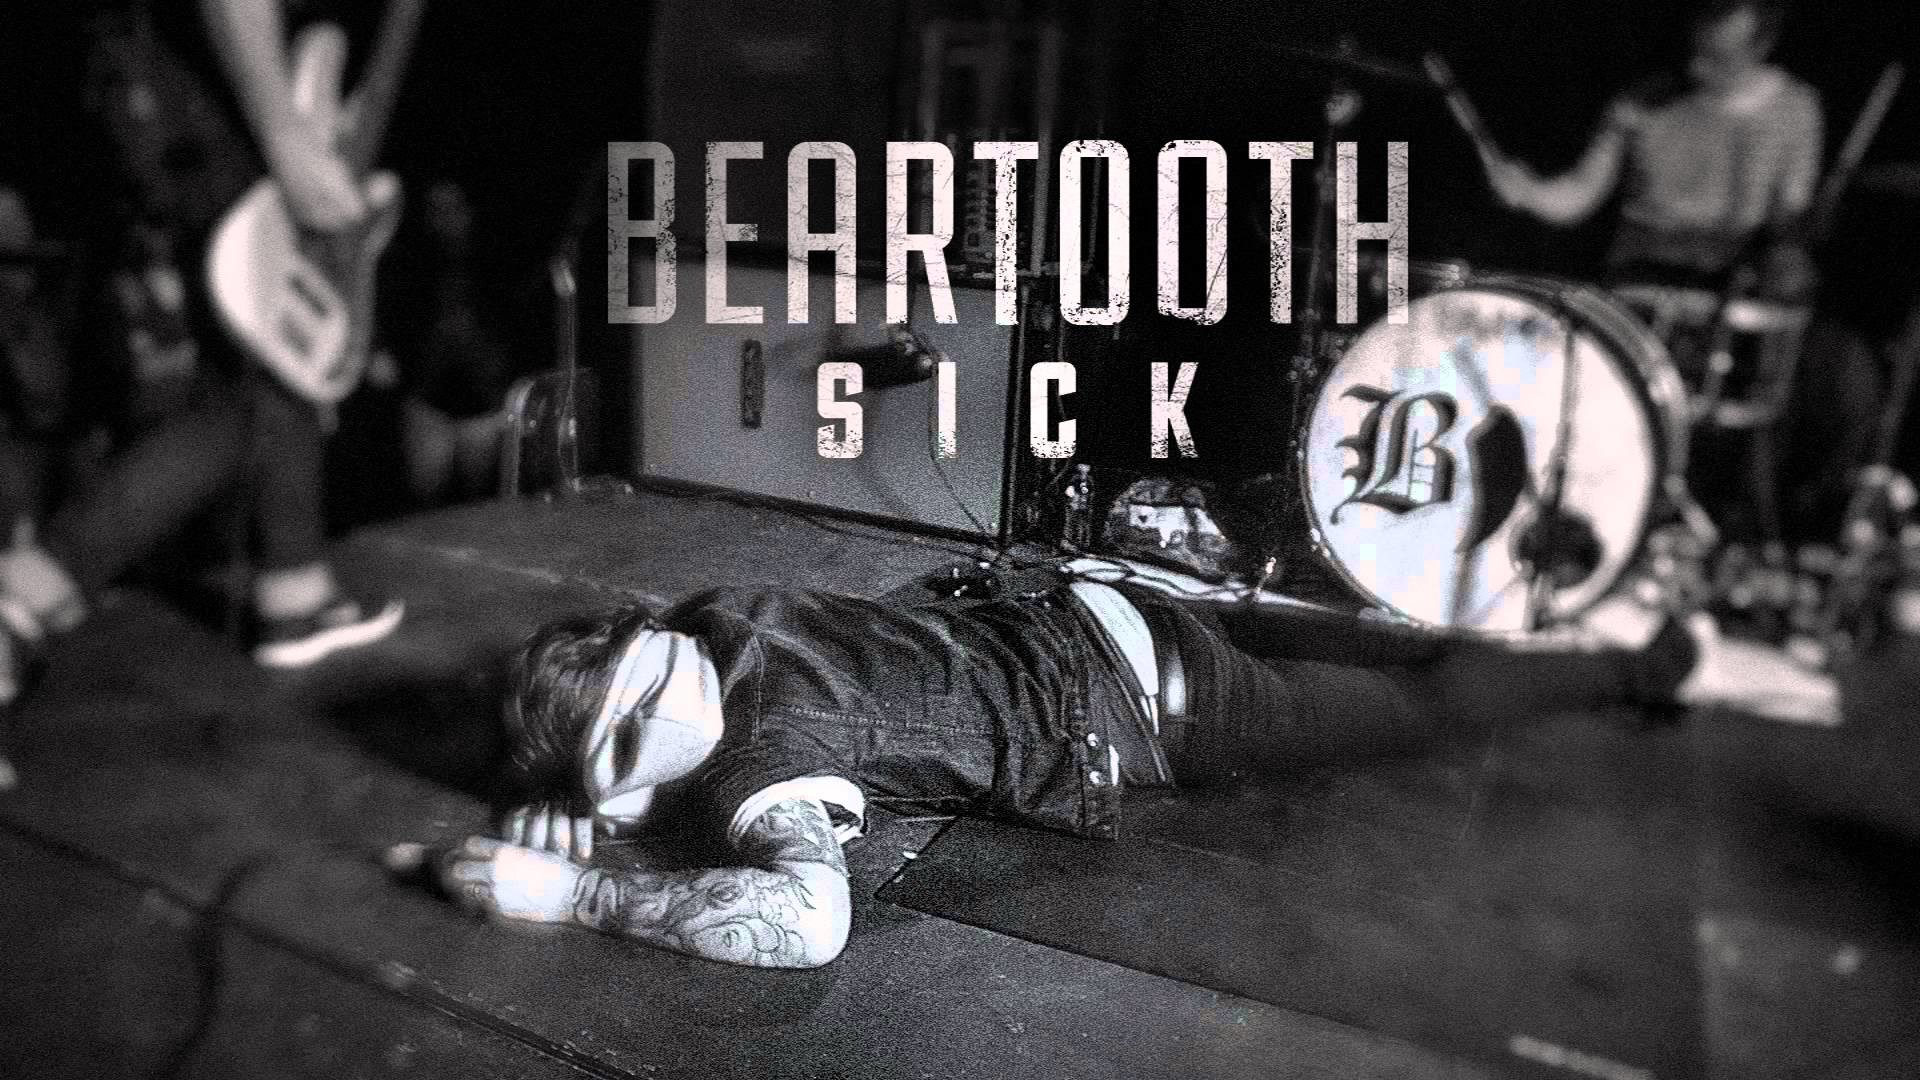 Monochrome HD desktop wallpaper featuring an energetic live performance with the word 'Beartooth' prominently displayed above the band.